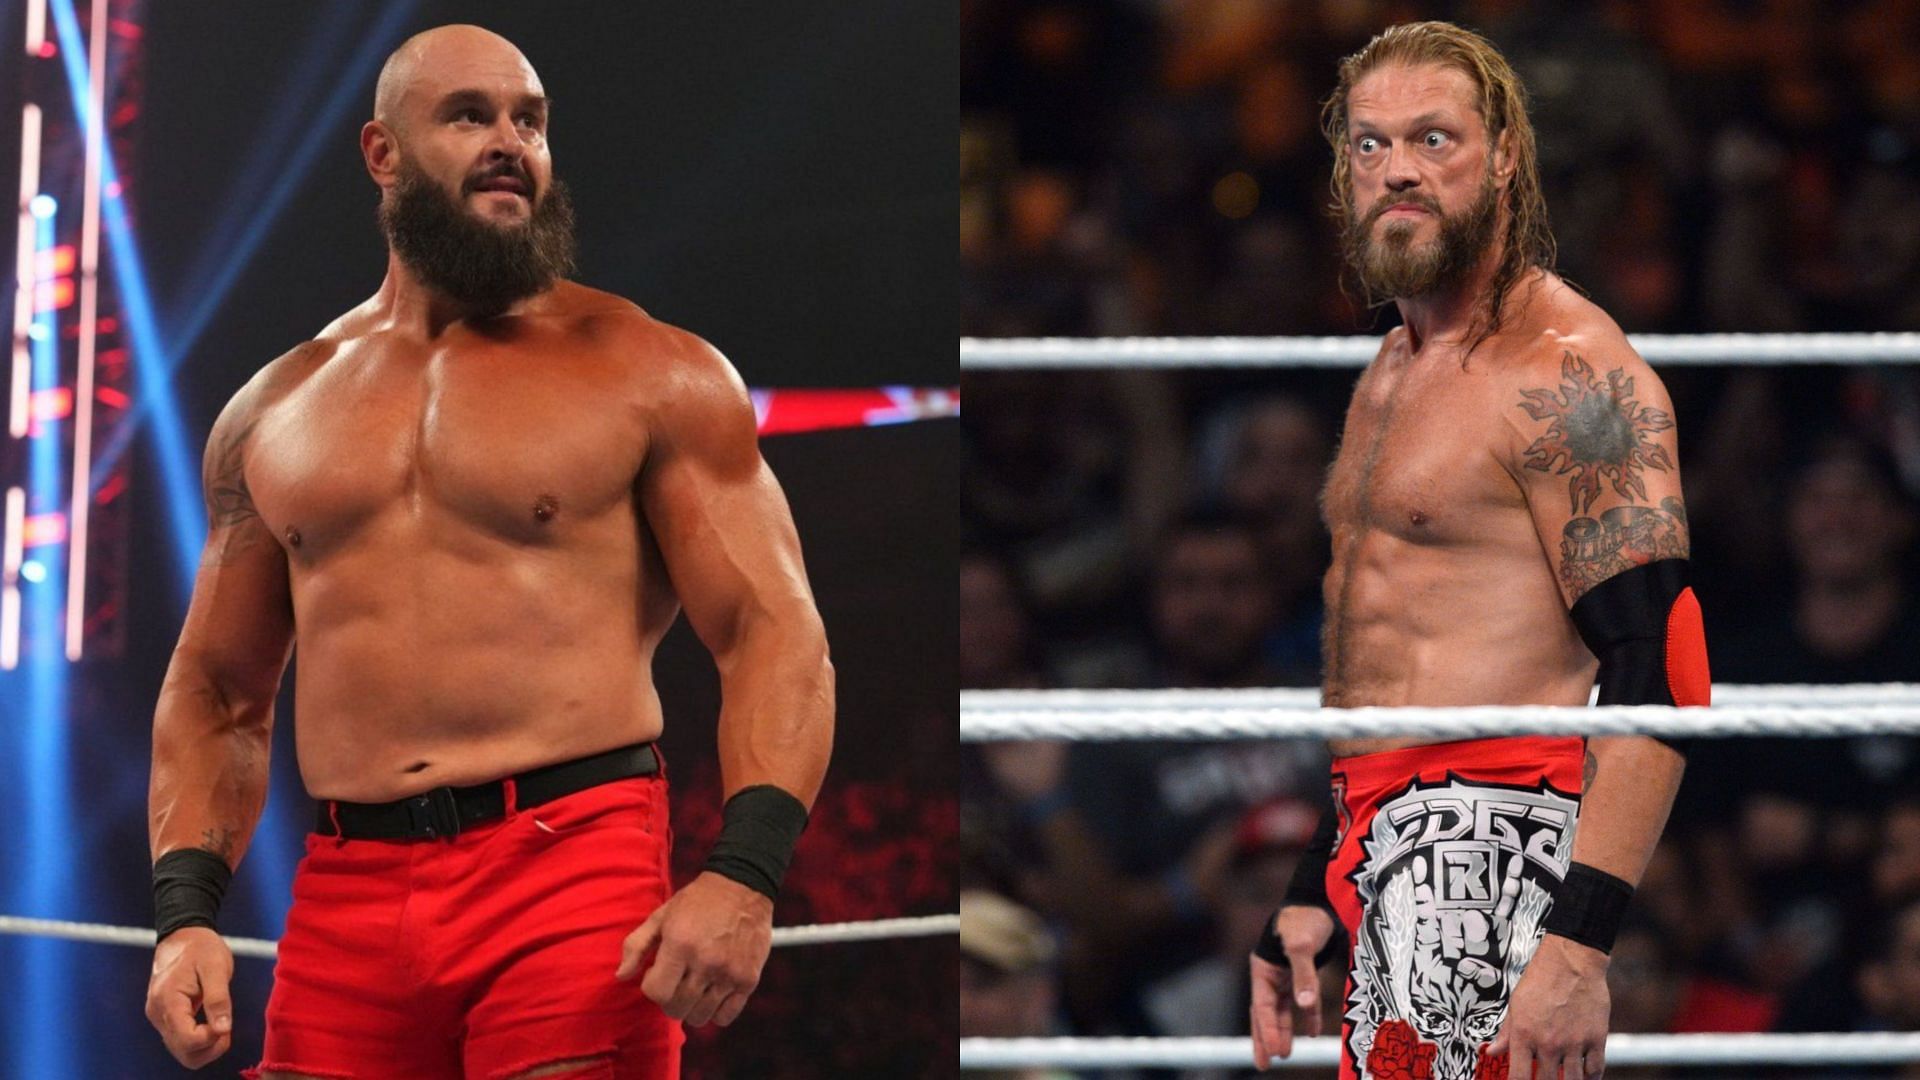 Braun Strowman (left) and WWE Hall of Famer Edge (right)